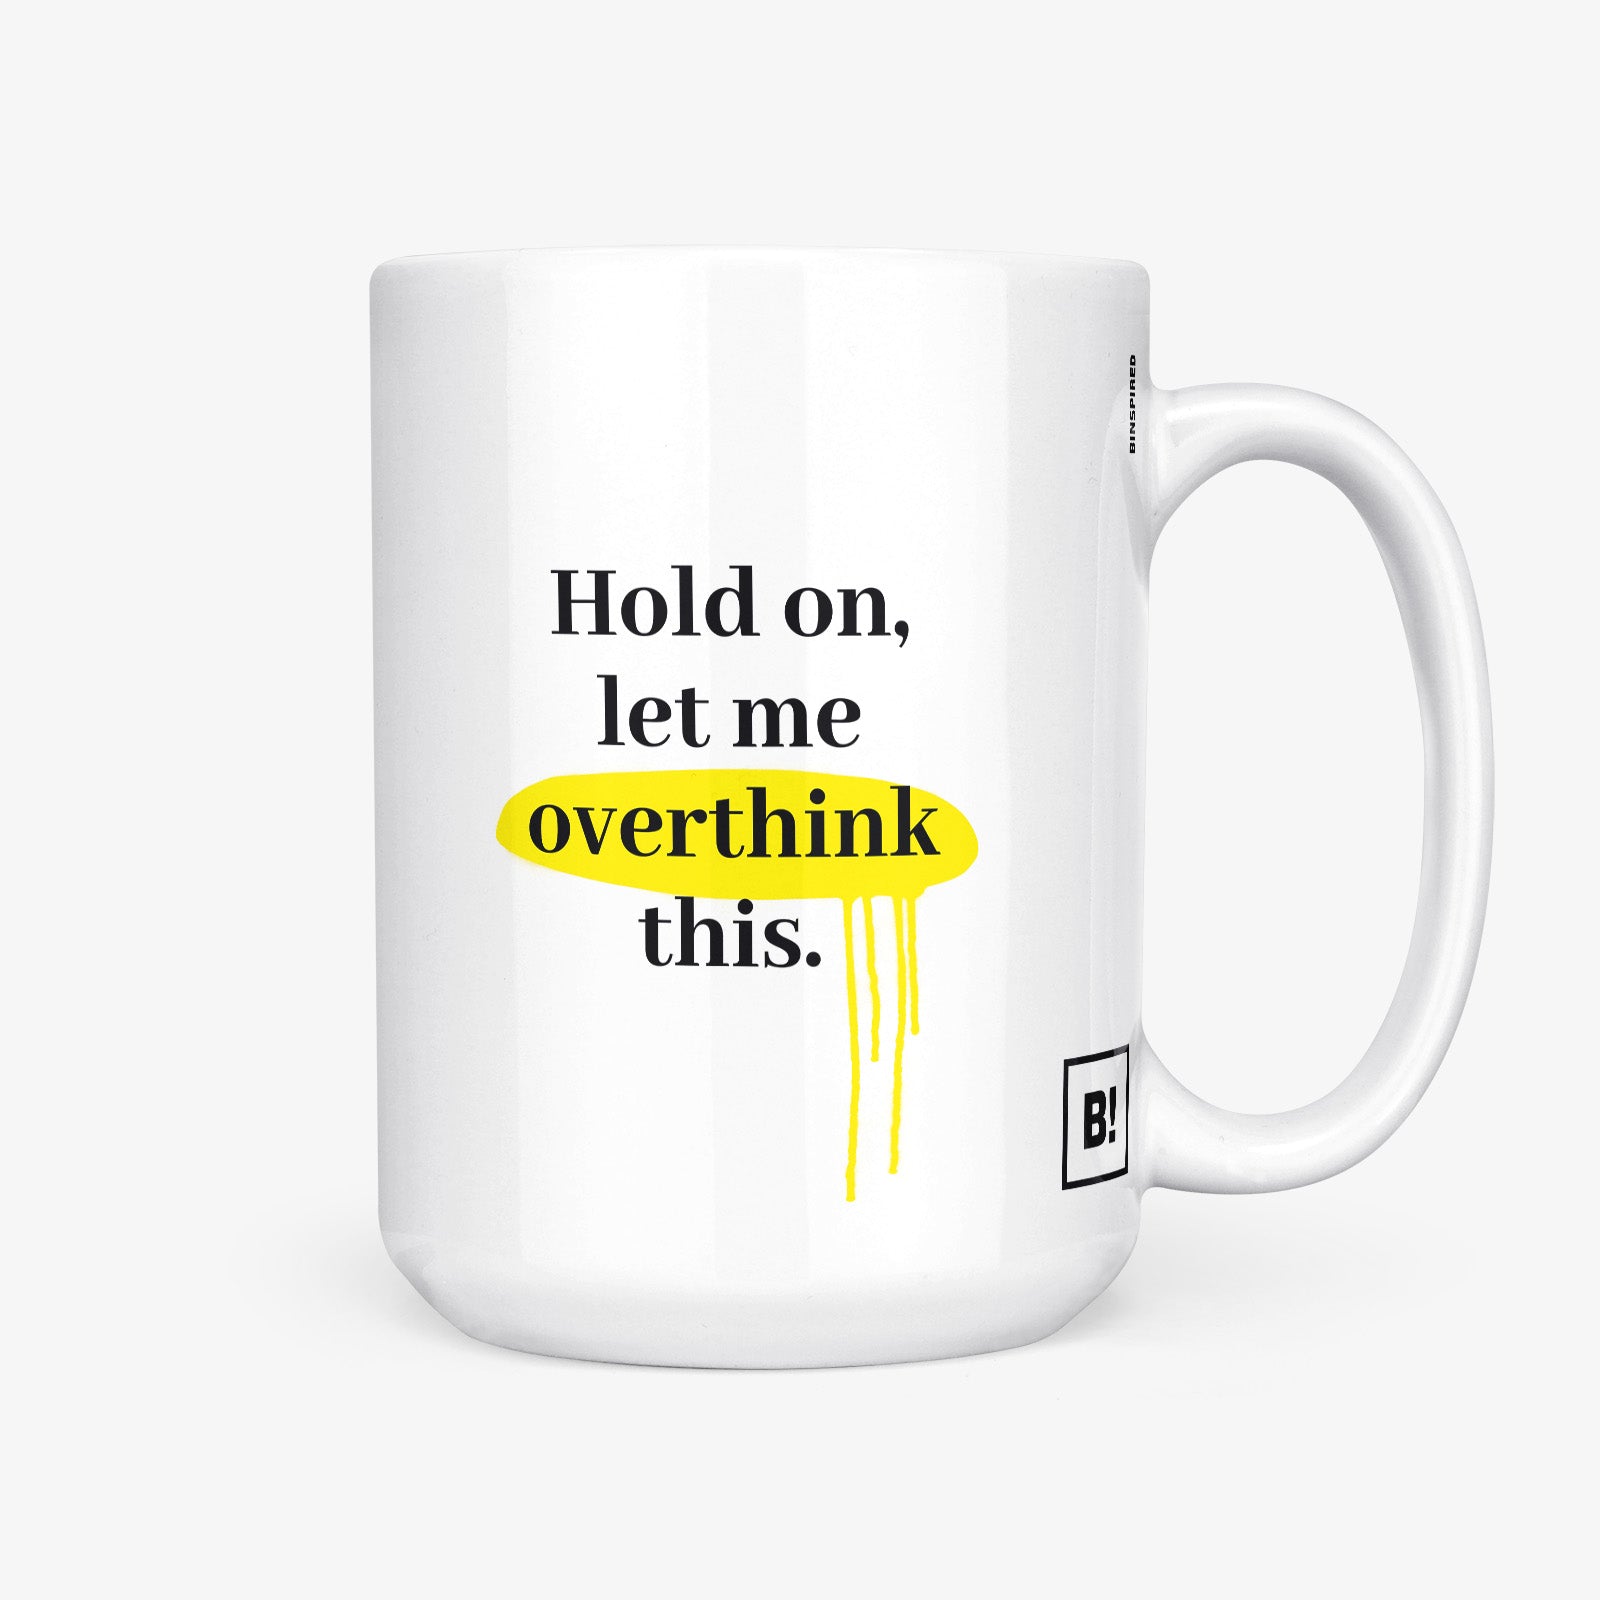 Get inspired by the quote, "Hold on, let me overthink this" on this 15oz white glossy coffee mug with the handle on the right.